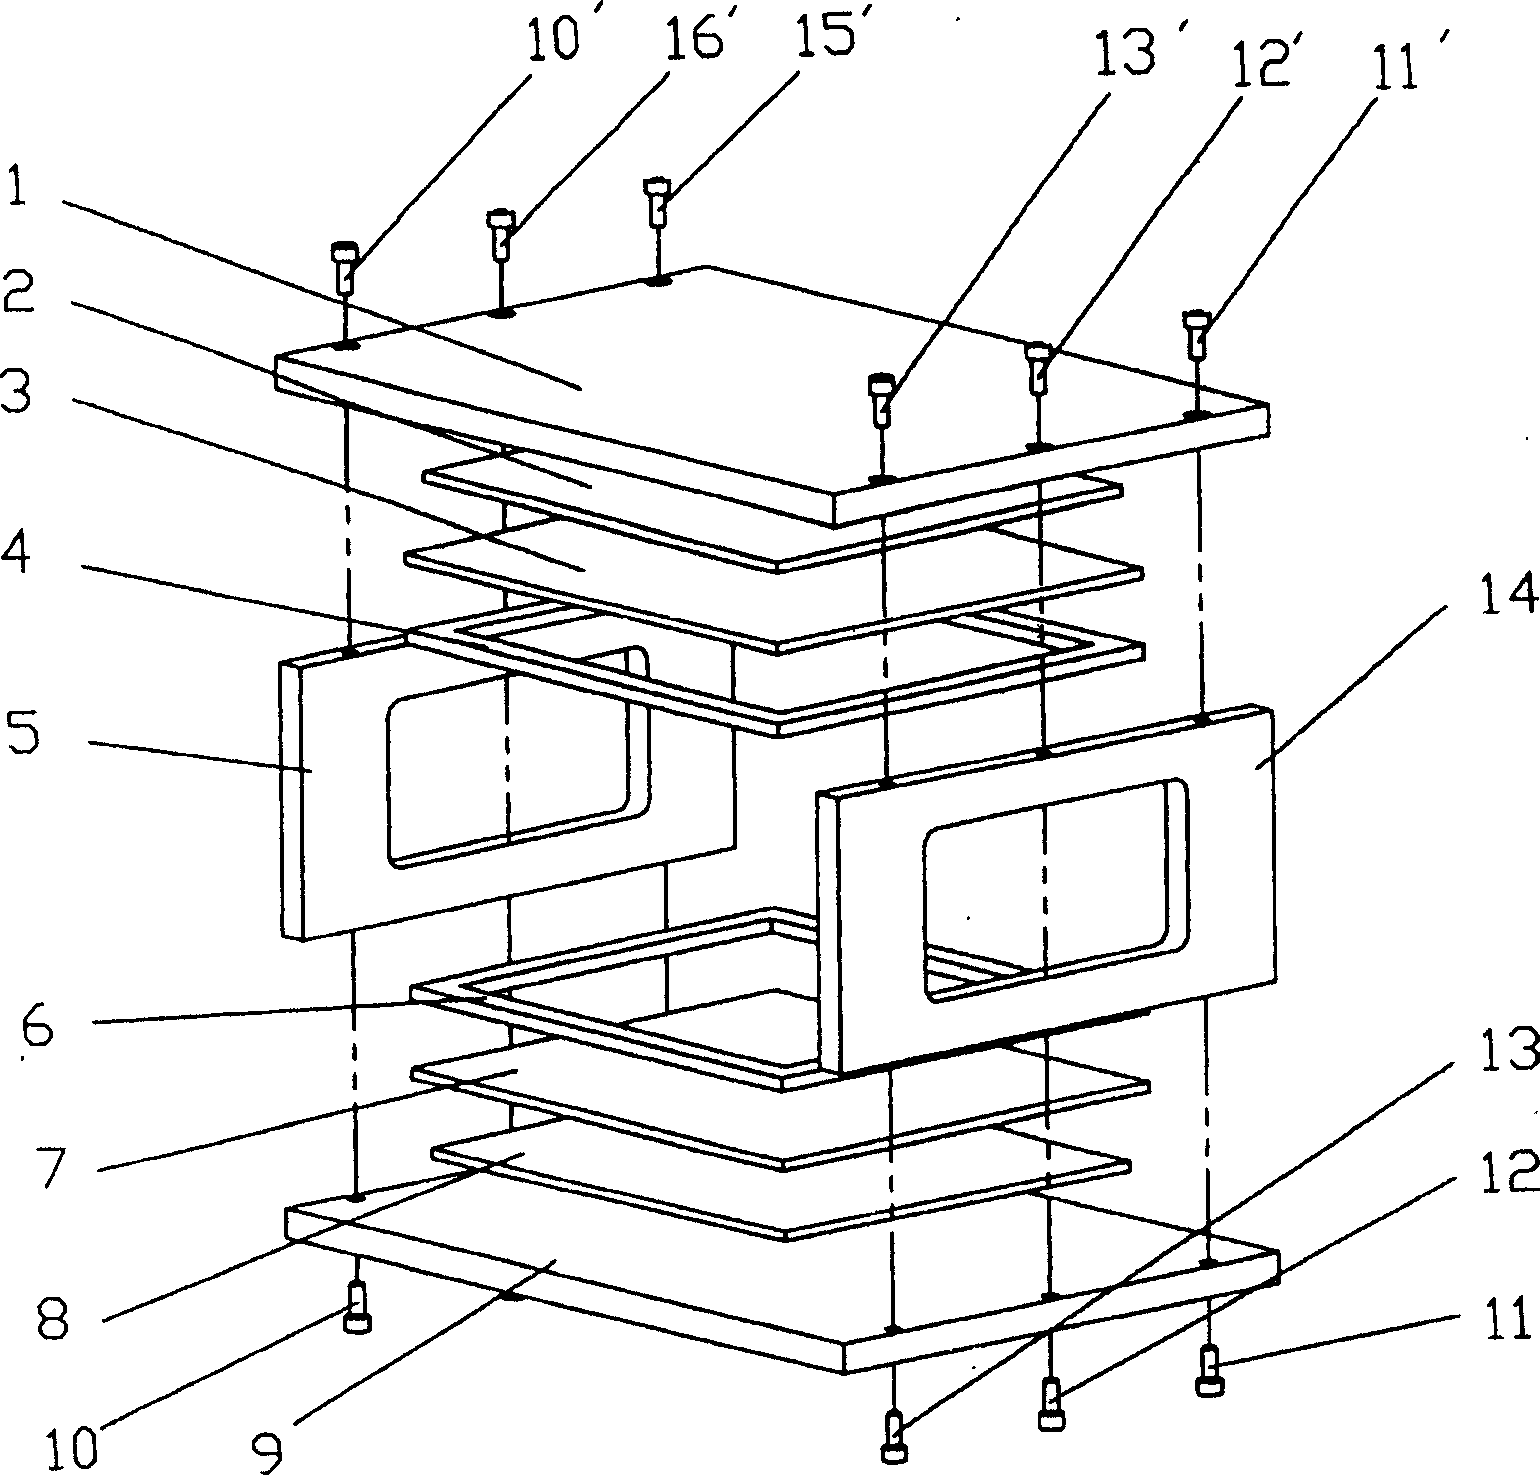 Apparatus and method for measuring stratum rock physical property by rock NMR relaxation signal